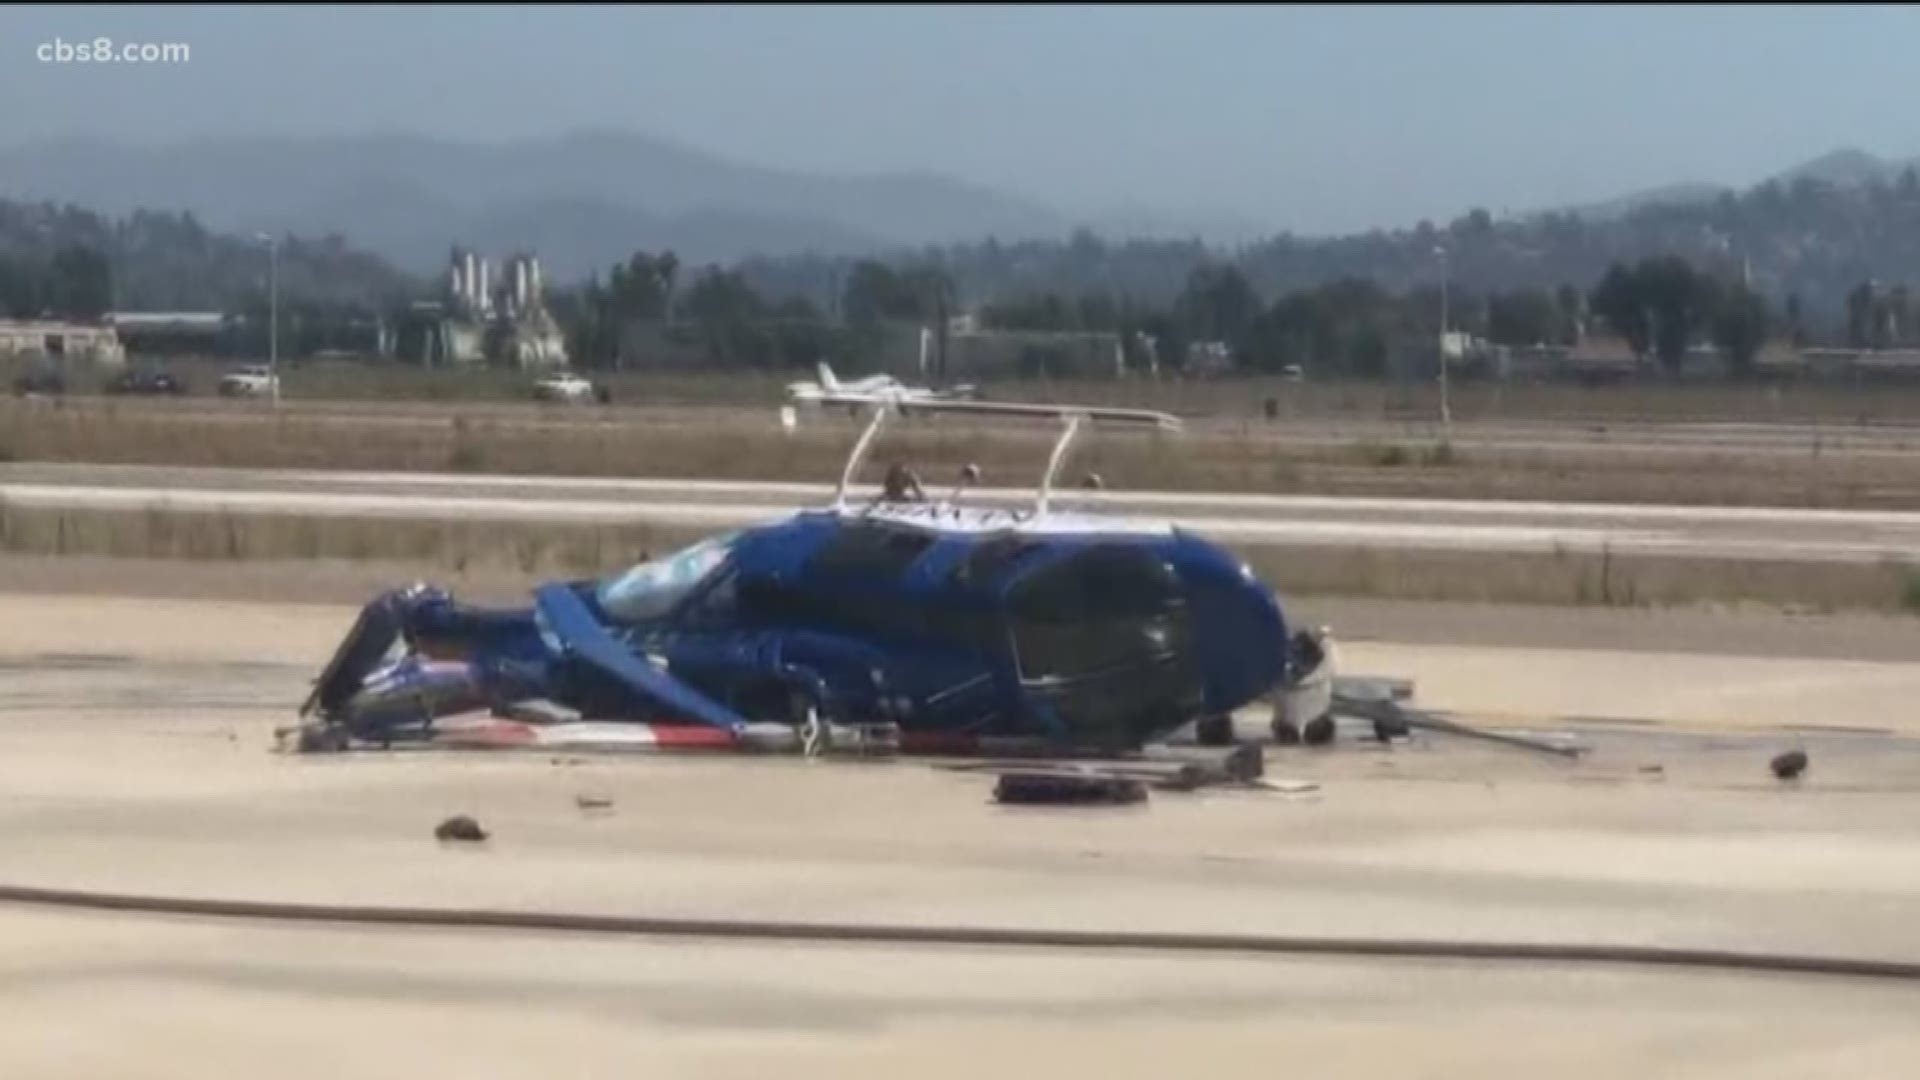 The news helicopter used by News 8 and other San Diego-based media outlets was returning from a routine flight Tuesday afternoon when it had difficulty with its landing.